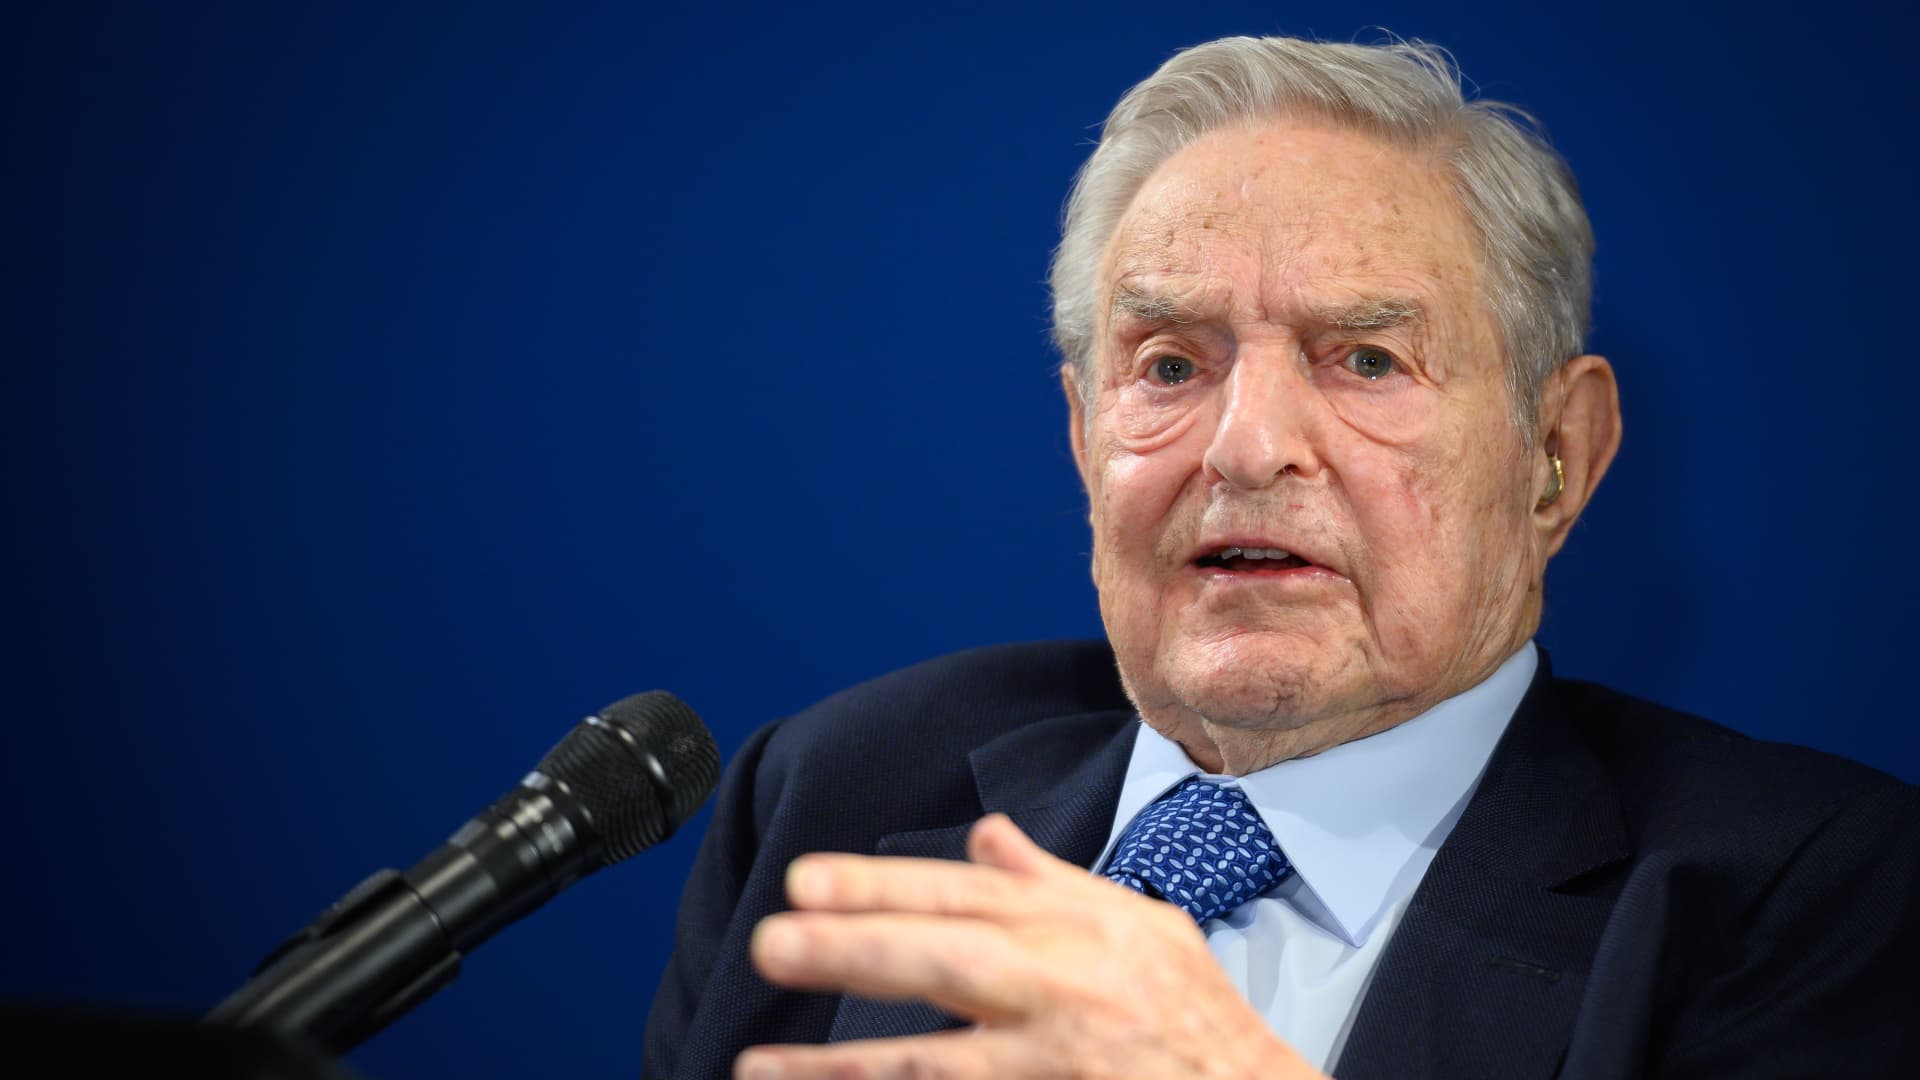 Hungarian-born US investor and philanthropist George Soros delivers a speech on the sideline of the World Economic Forum (WEF) annual meeting, on January 23, 2020 in Davos, eastern Switzerland.